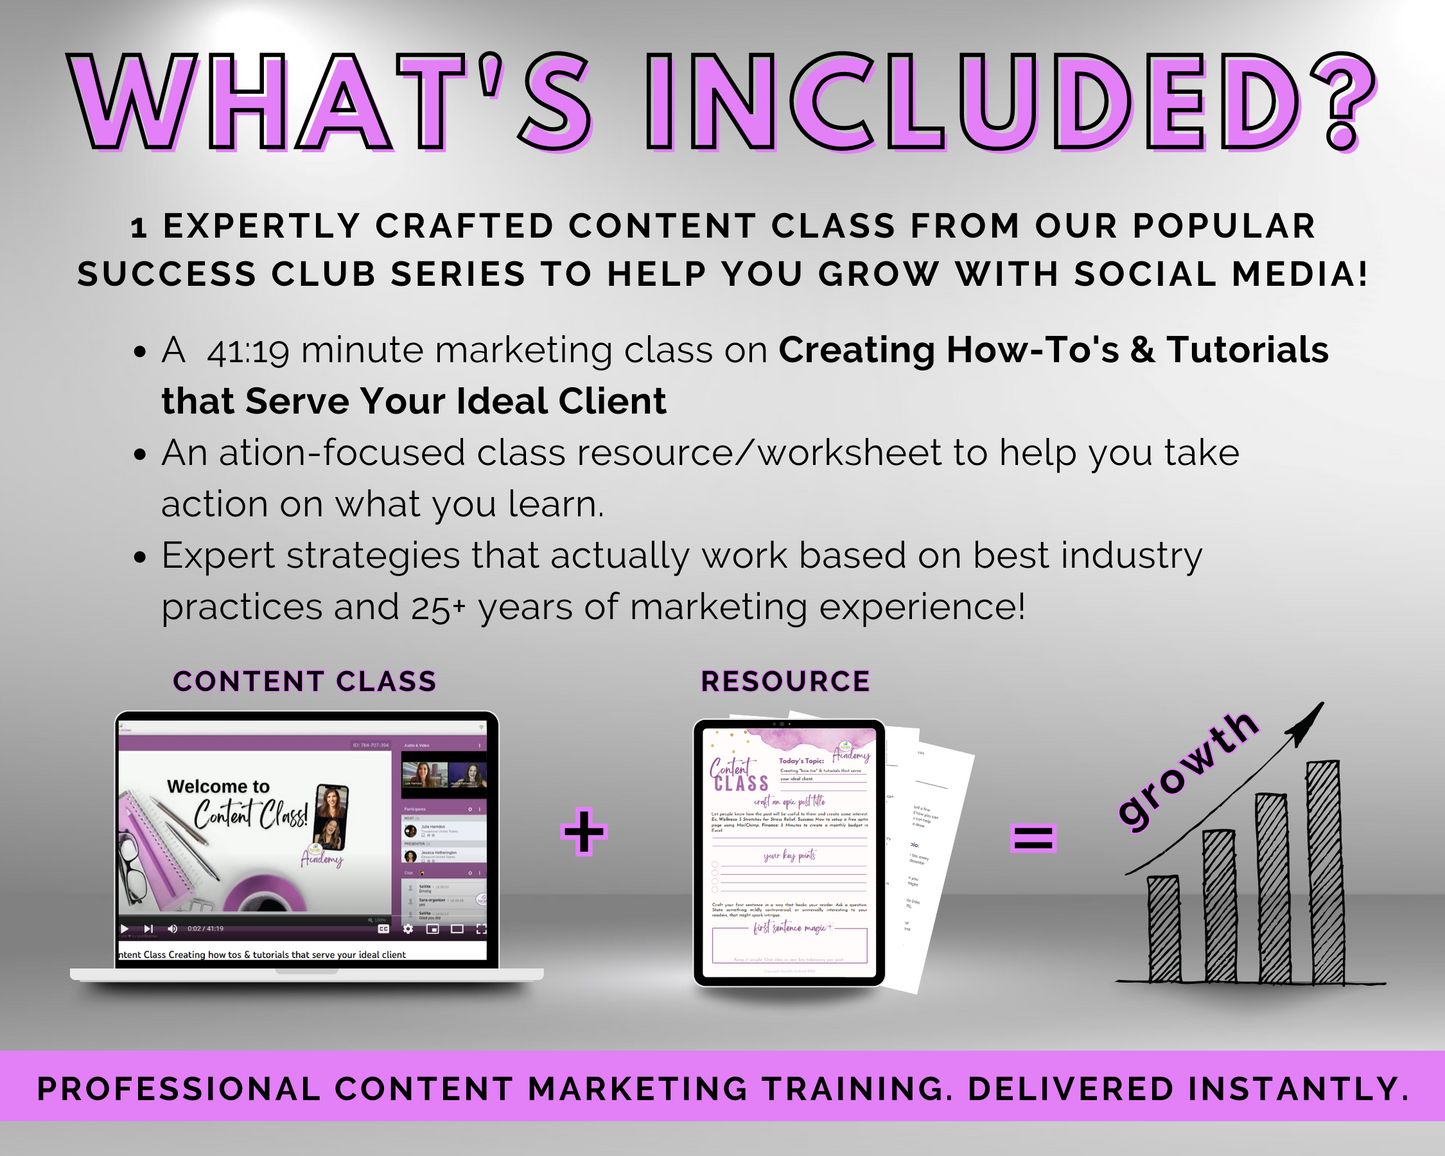 Content Class - Creating How-To's & Tutorials that Serve Your Ideal Client Masterclass